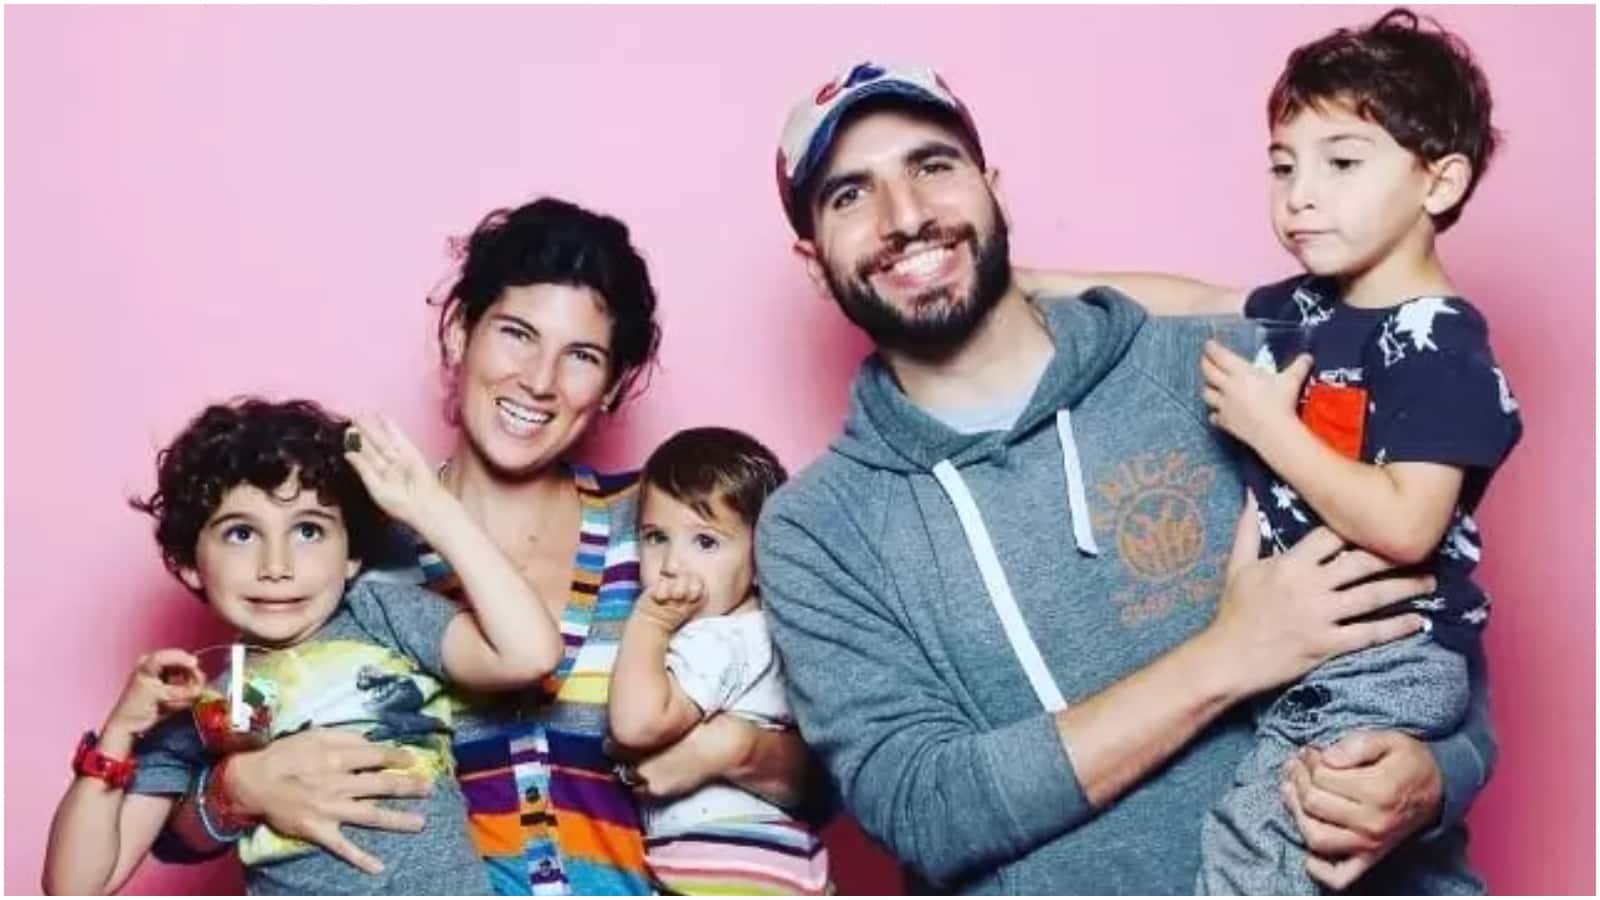 Image of Ariel Helwani with his wife, Jaclyn Stein, and their kids